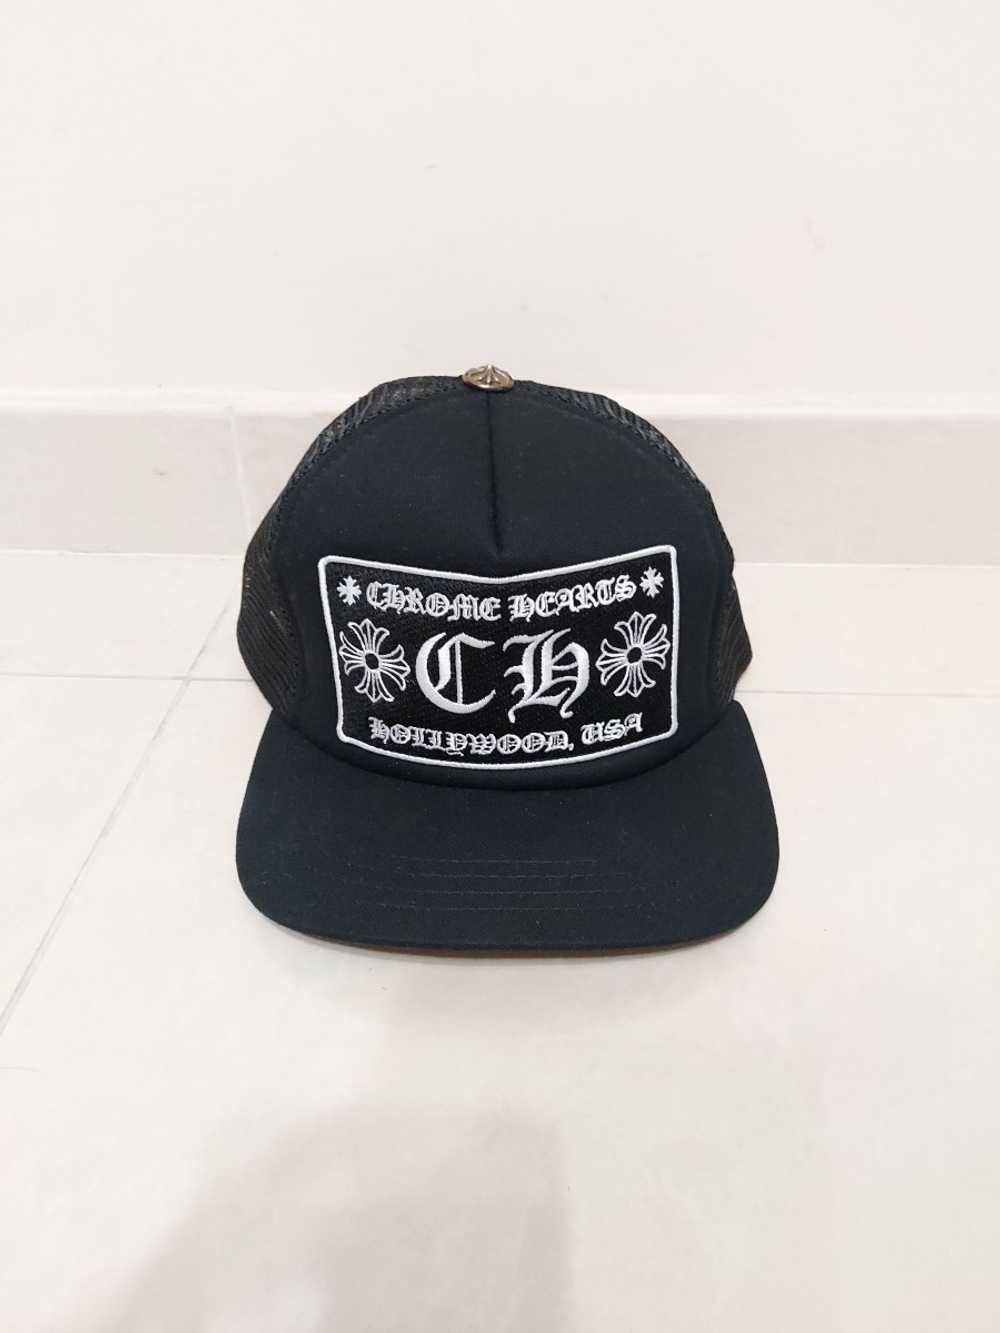 Chrome Hearts Black Hollywood USA CH Trucker Hat - image 1